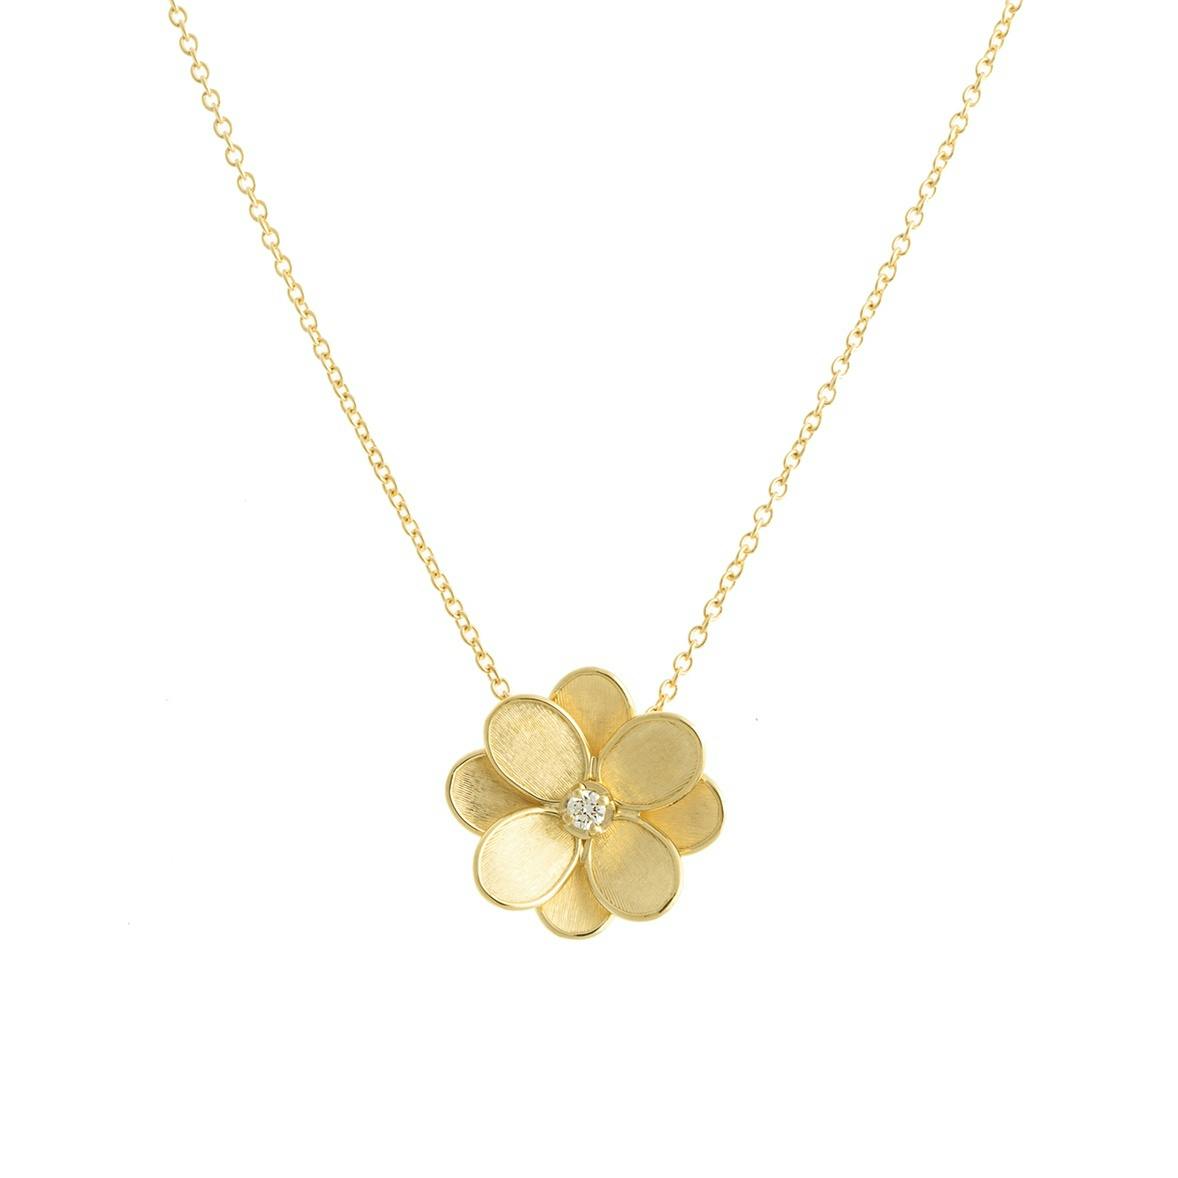 Marco Bicego Petali Small Flower Pendant Necklace 0